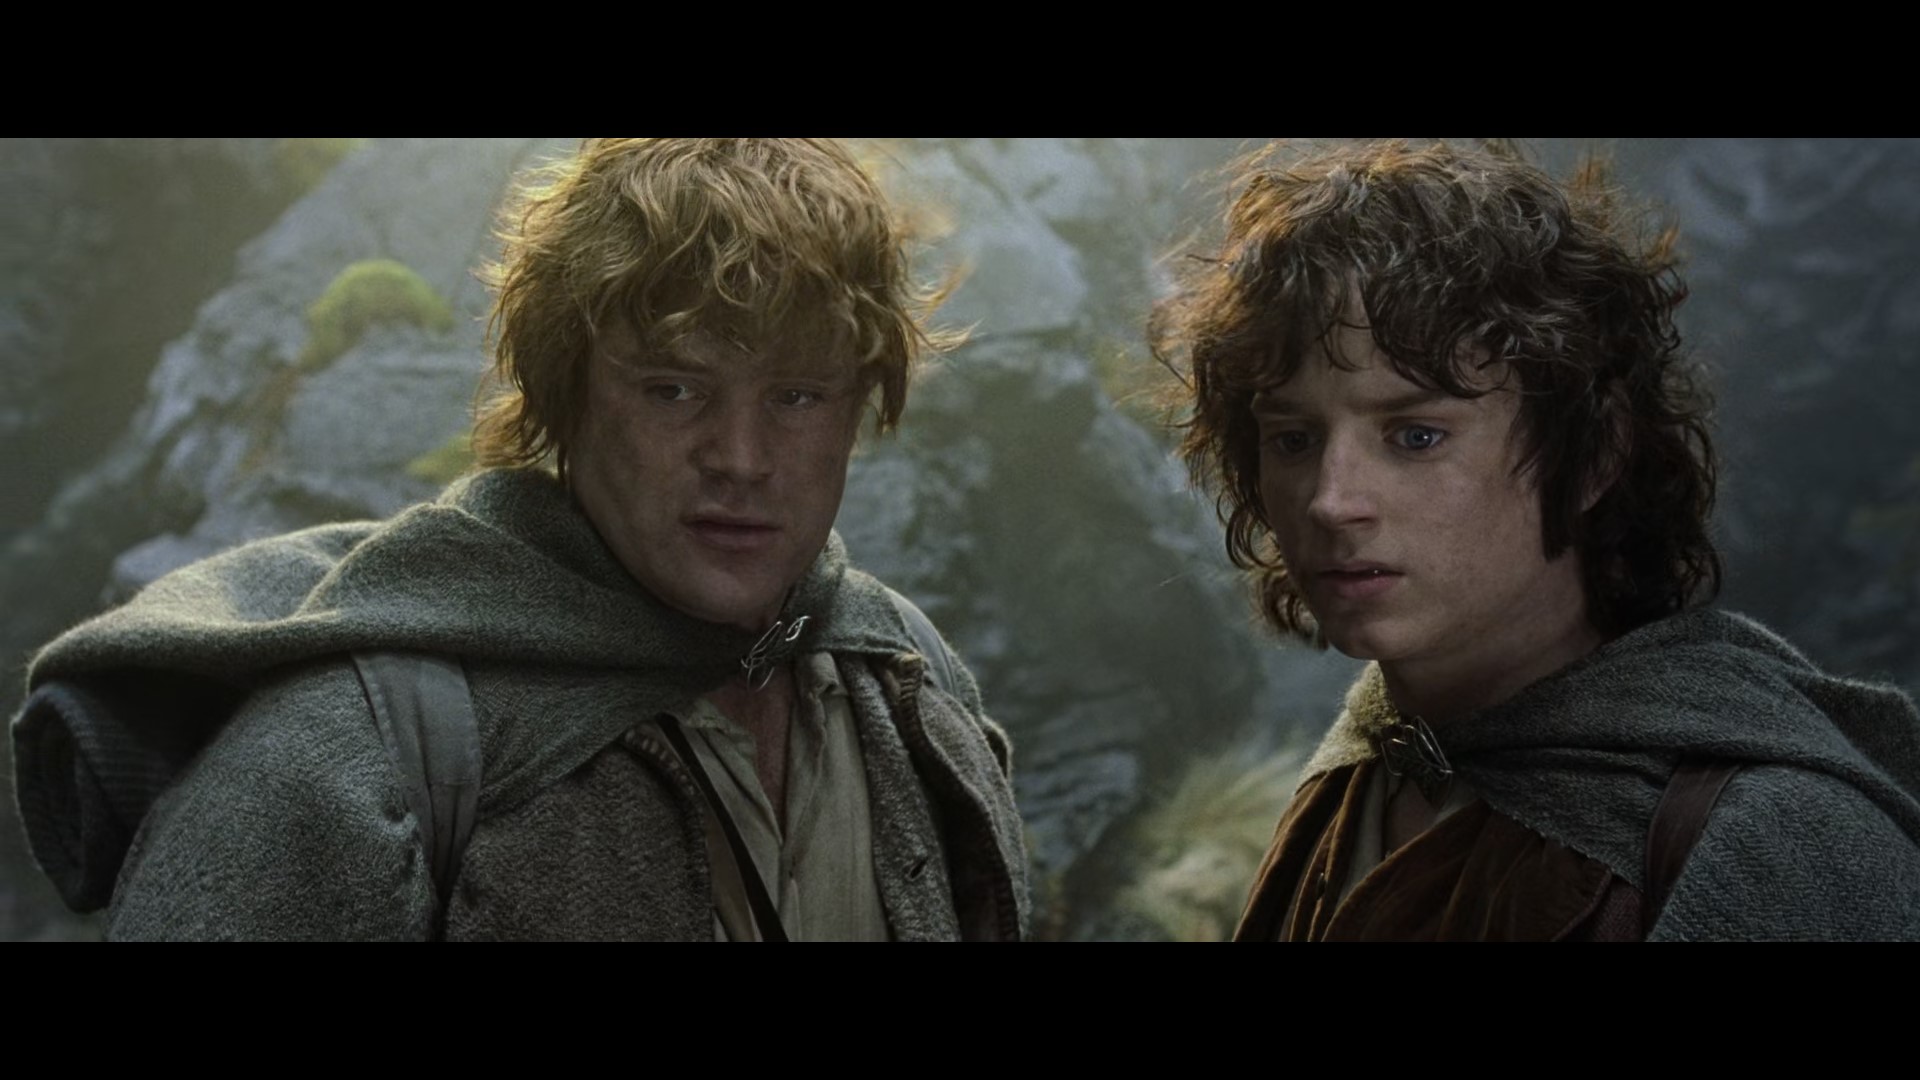 Hobbits (Source - The Two Towers from the movie The Lord of the Rings)